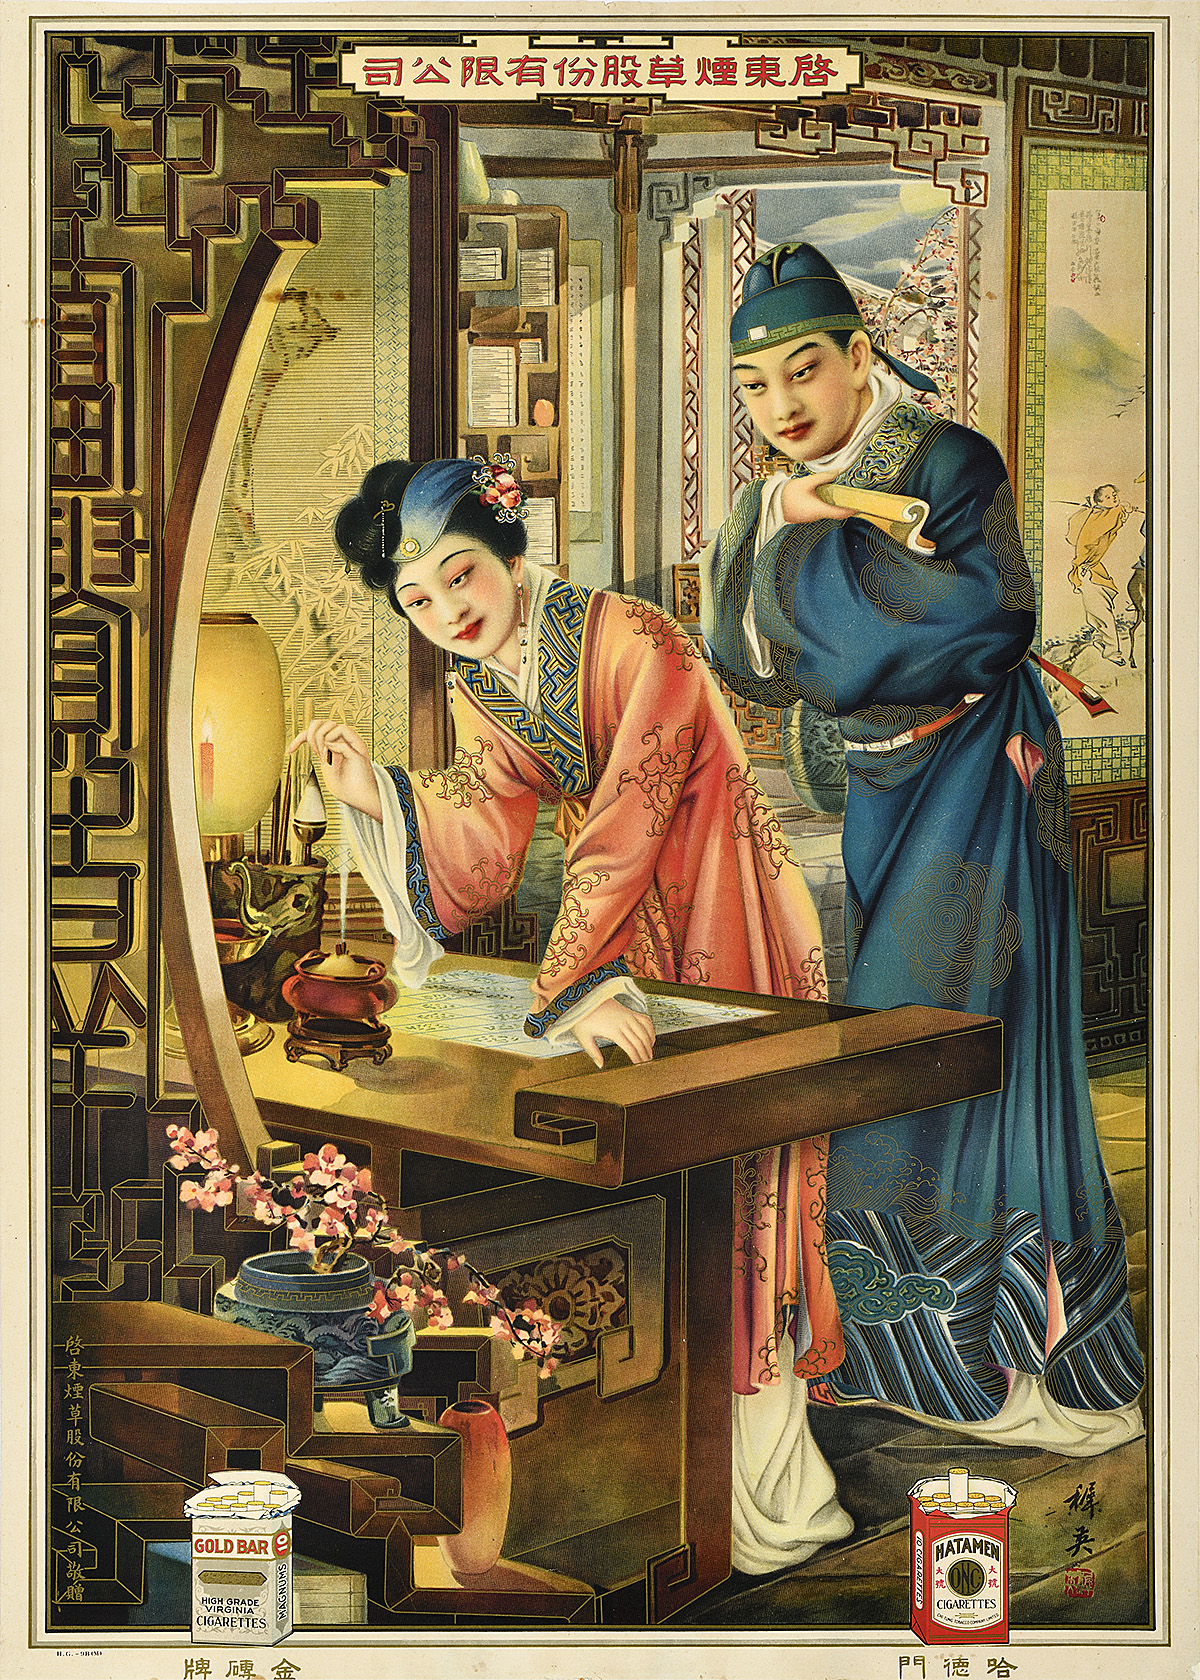 An illustrational poster featuring an Asian man and woman dressed traditionally within a domestic interior.